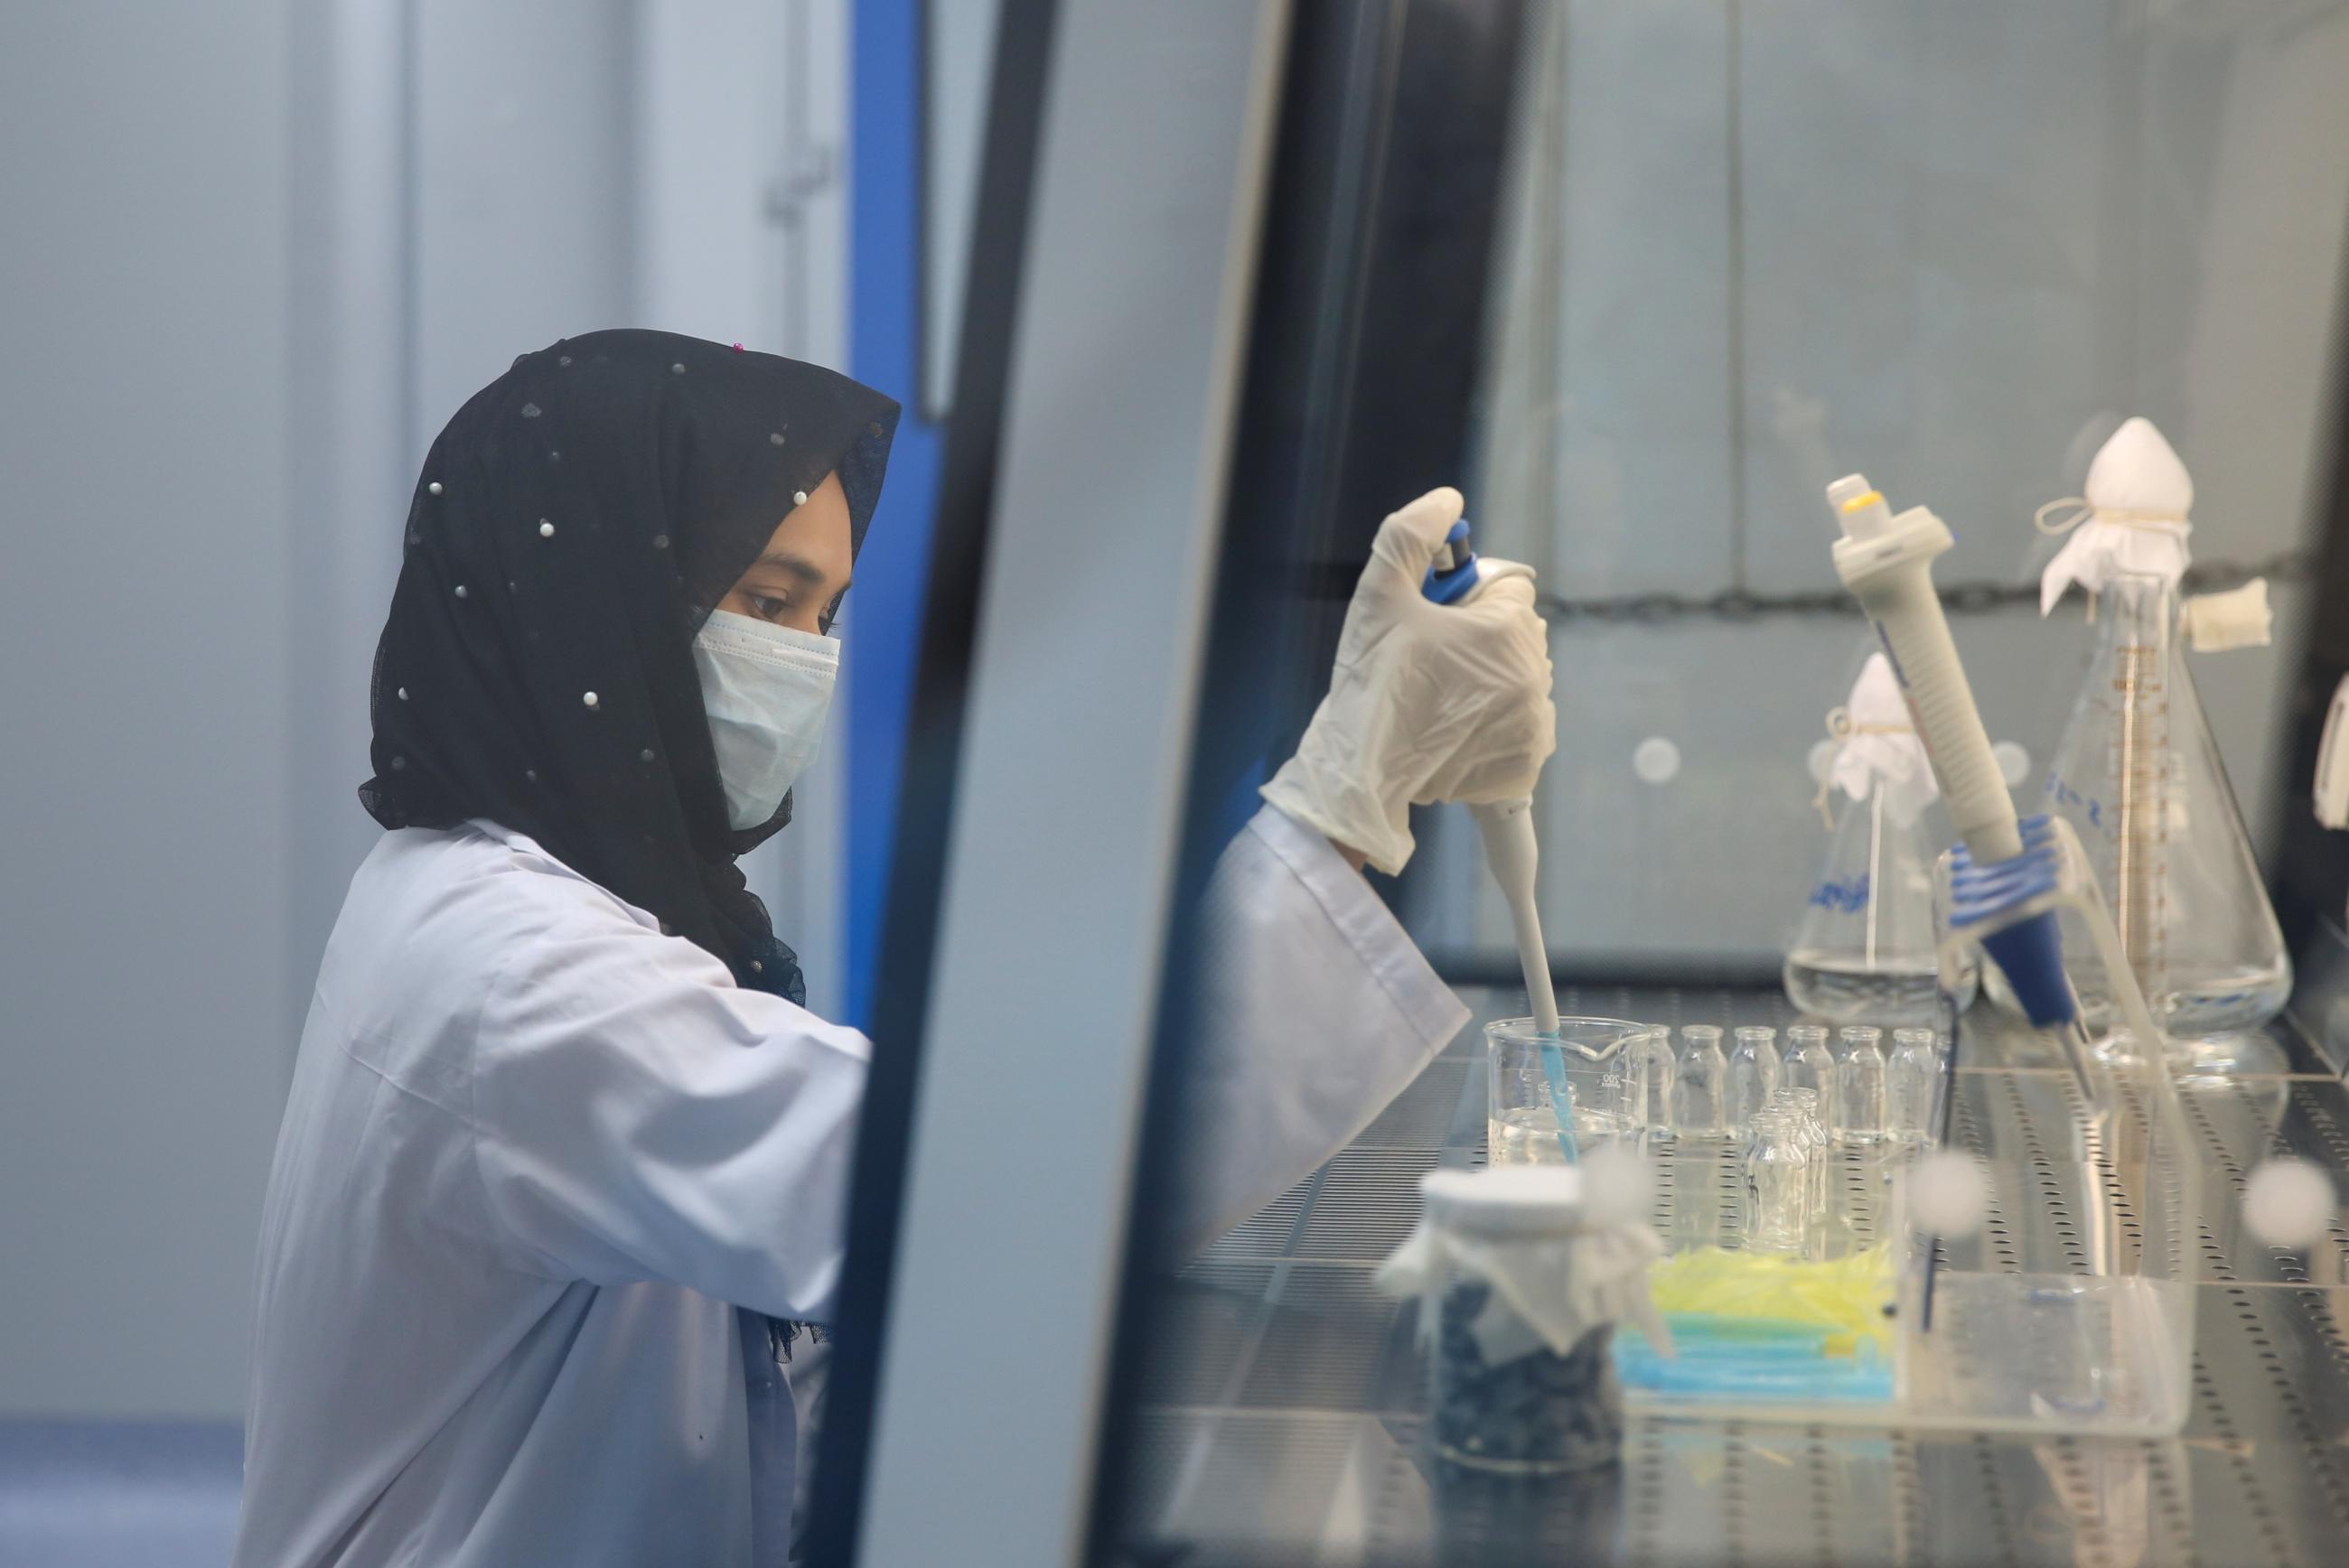 Ayesha Shehzadi, a lab technician, carries out testing procedures for the PakVac COVID-19 vaccine, produced locally at the National Institute of Health in Islamabad, Pakistan, on June 3, 2021.